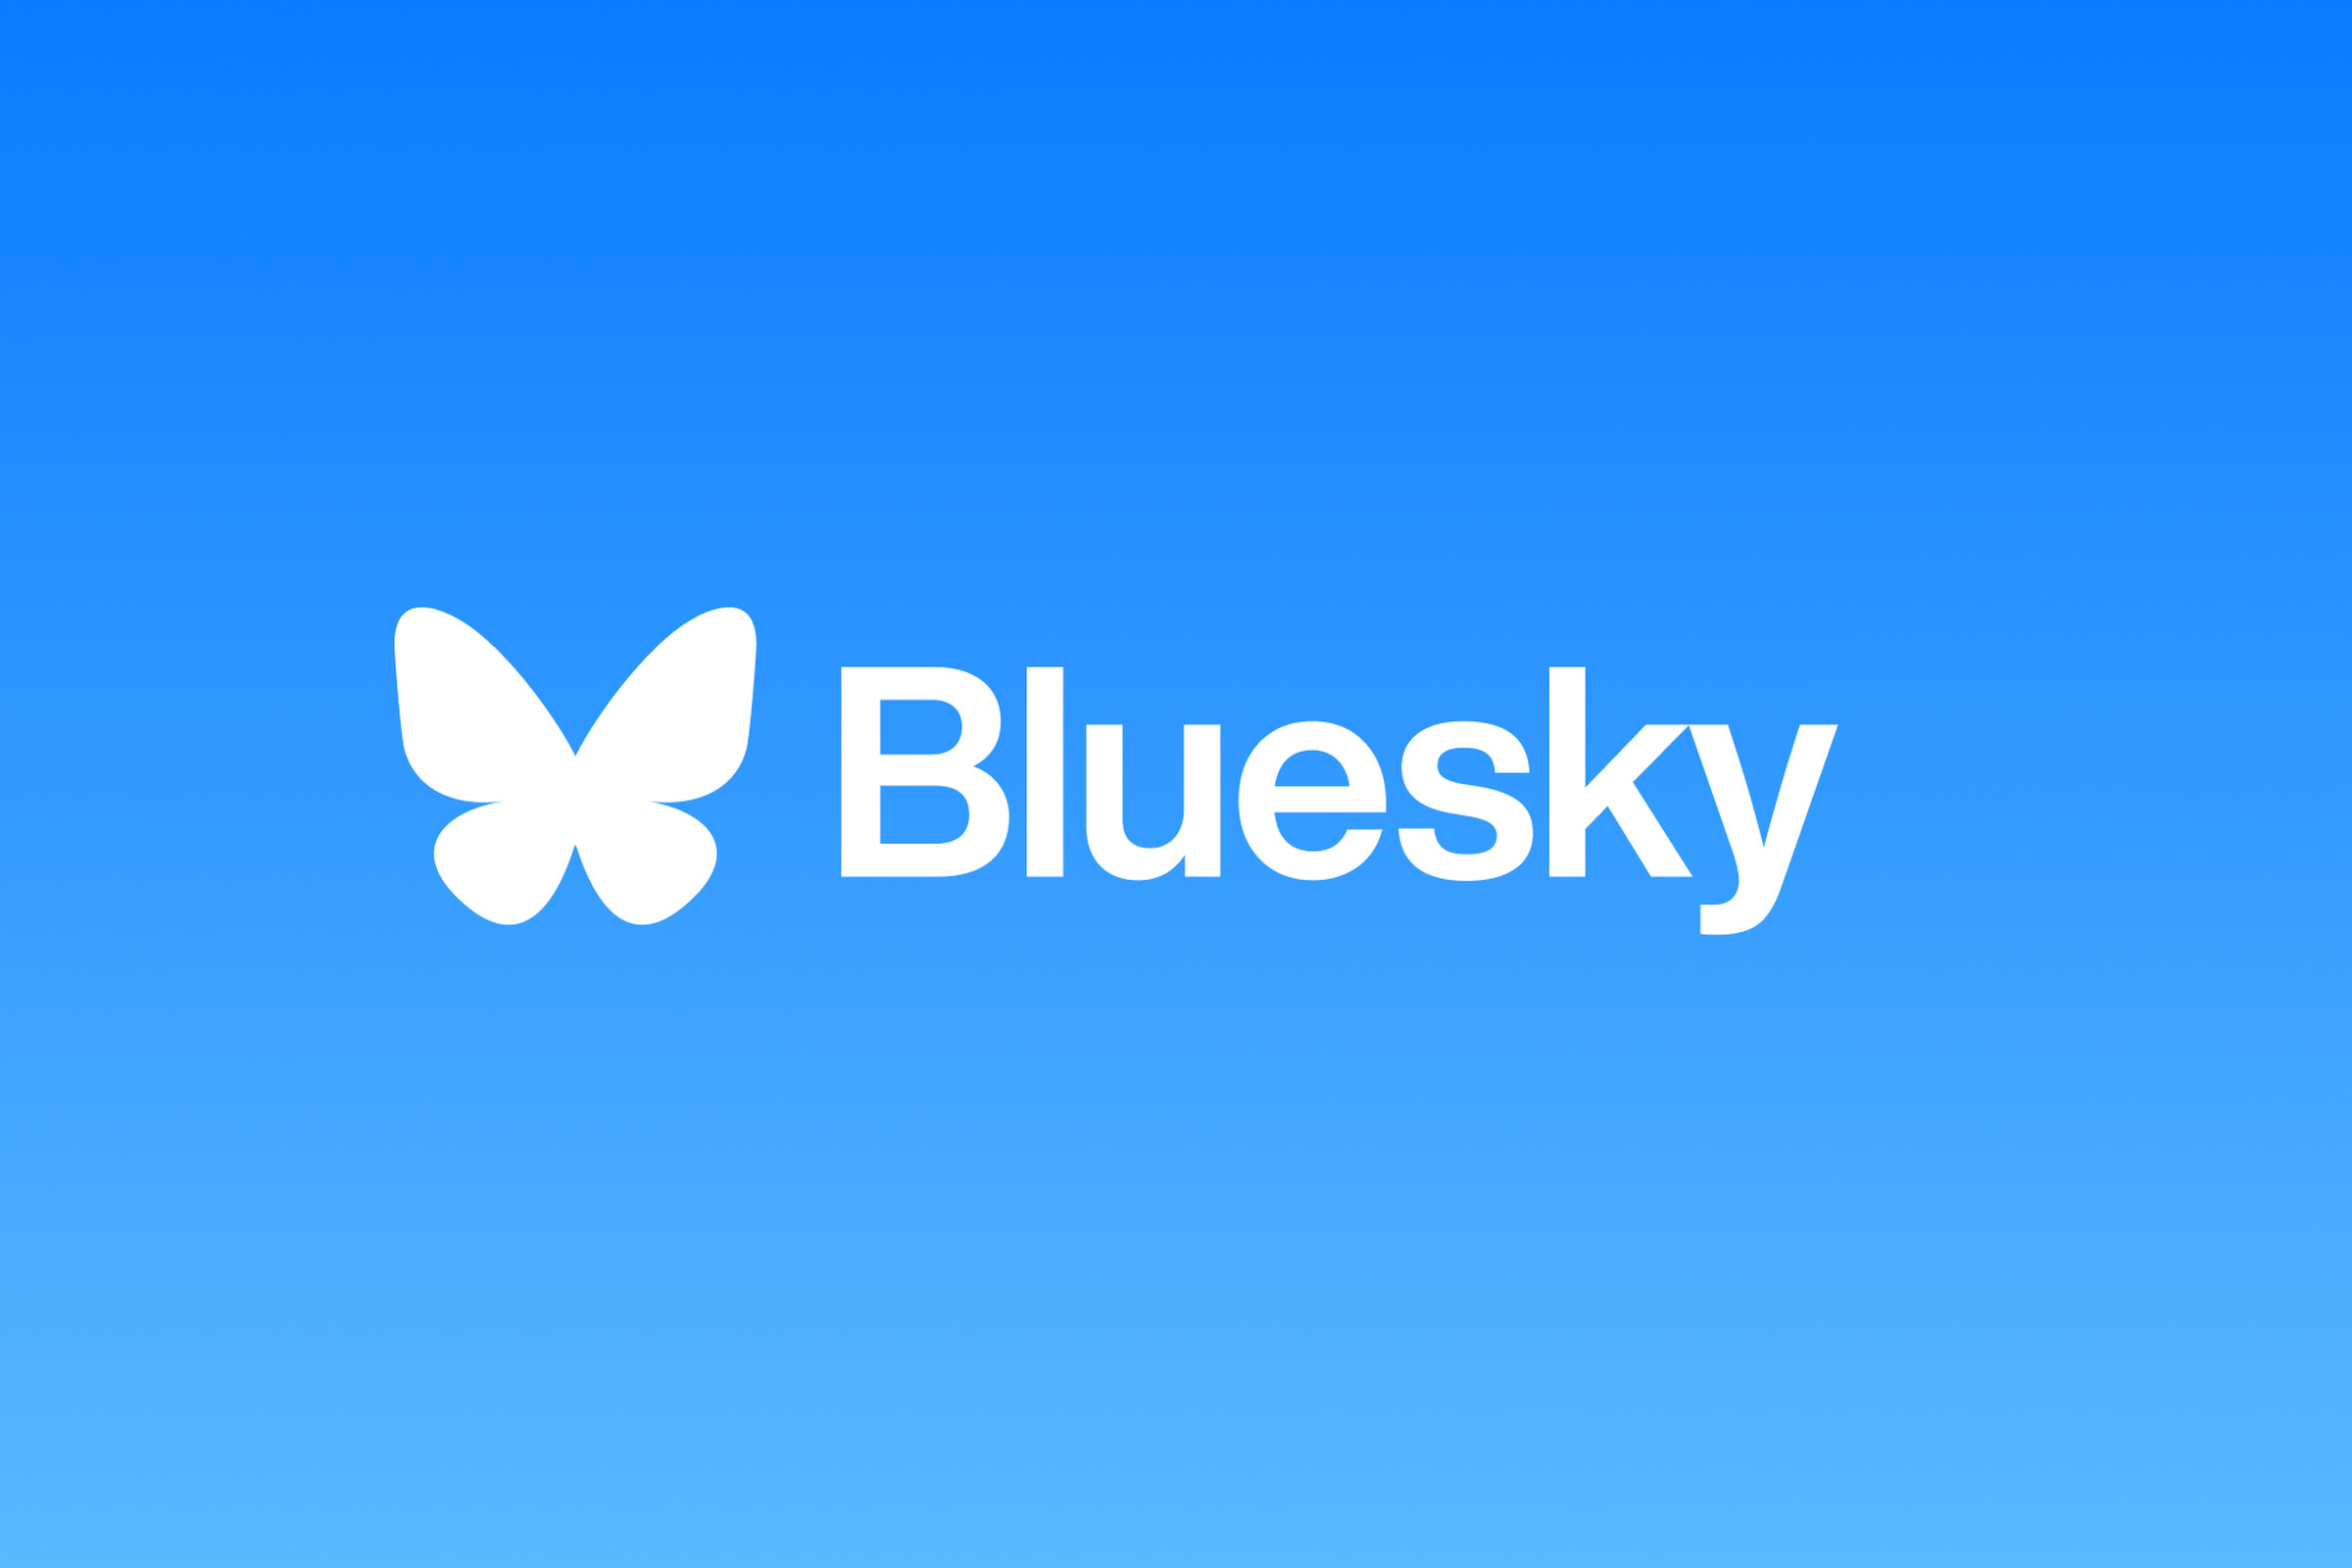 An image showing the Bluesky logo on a gradient blue background